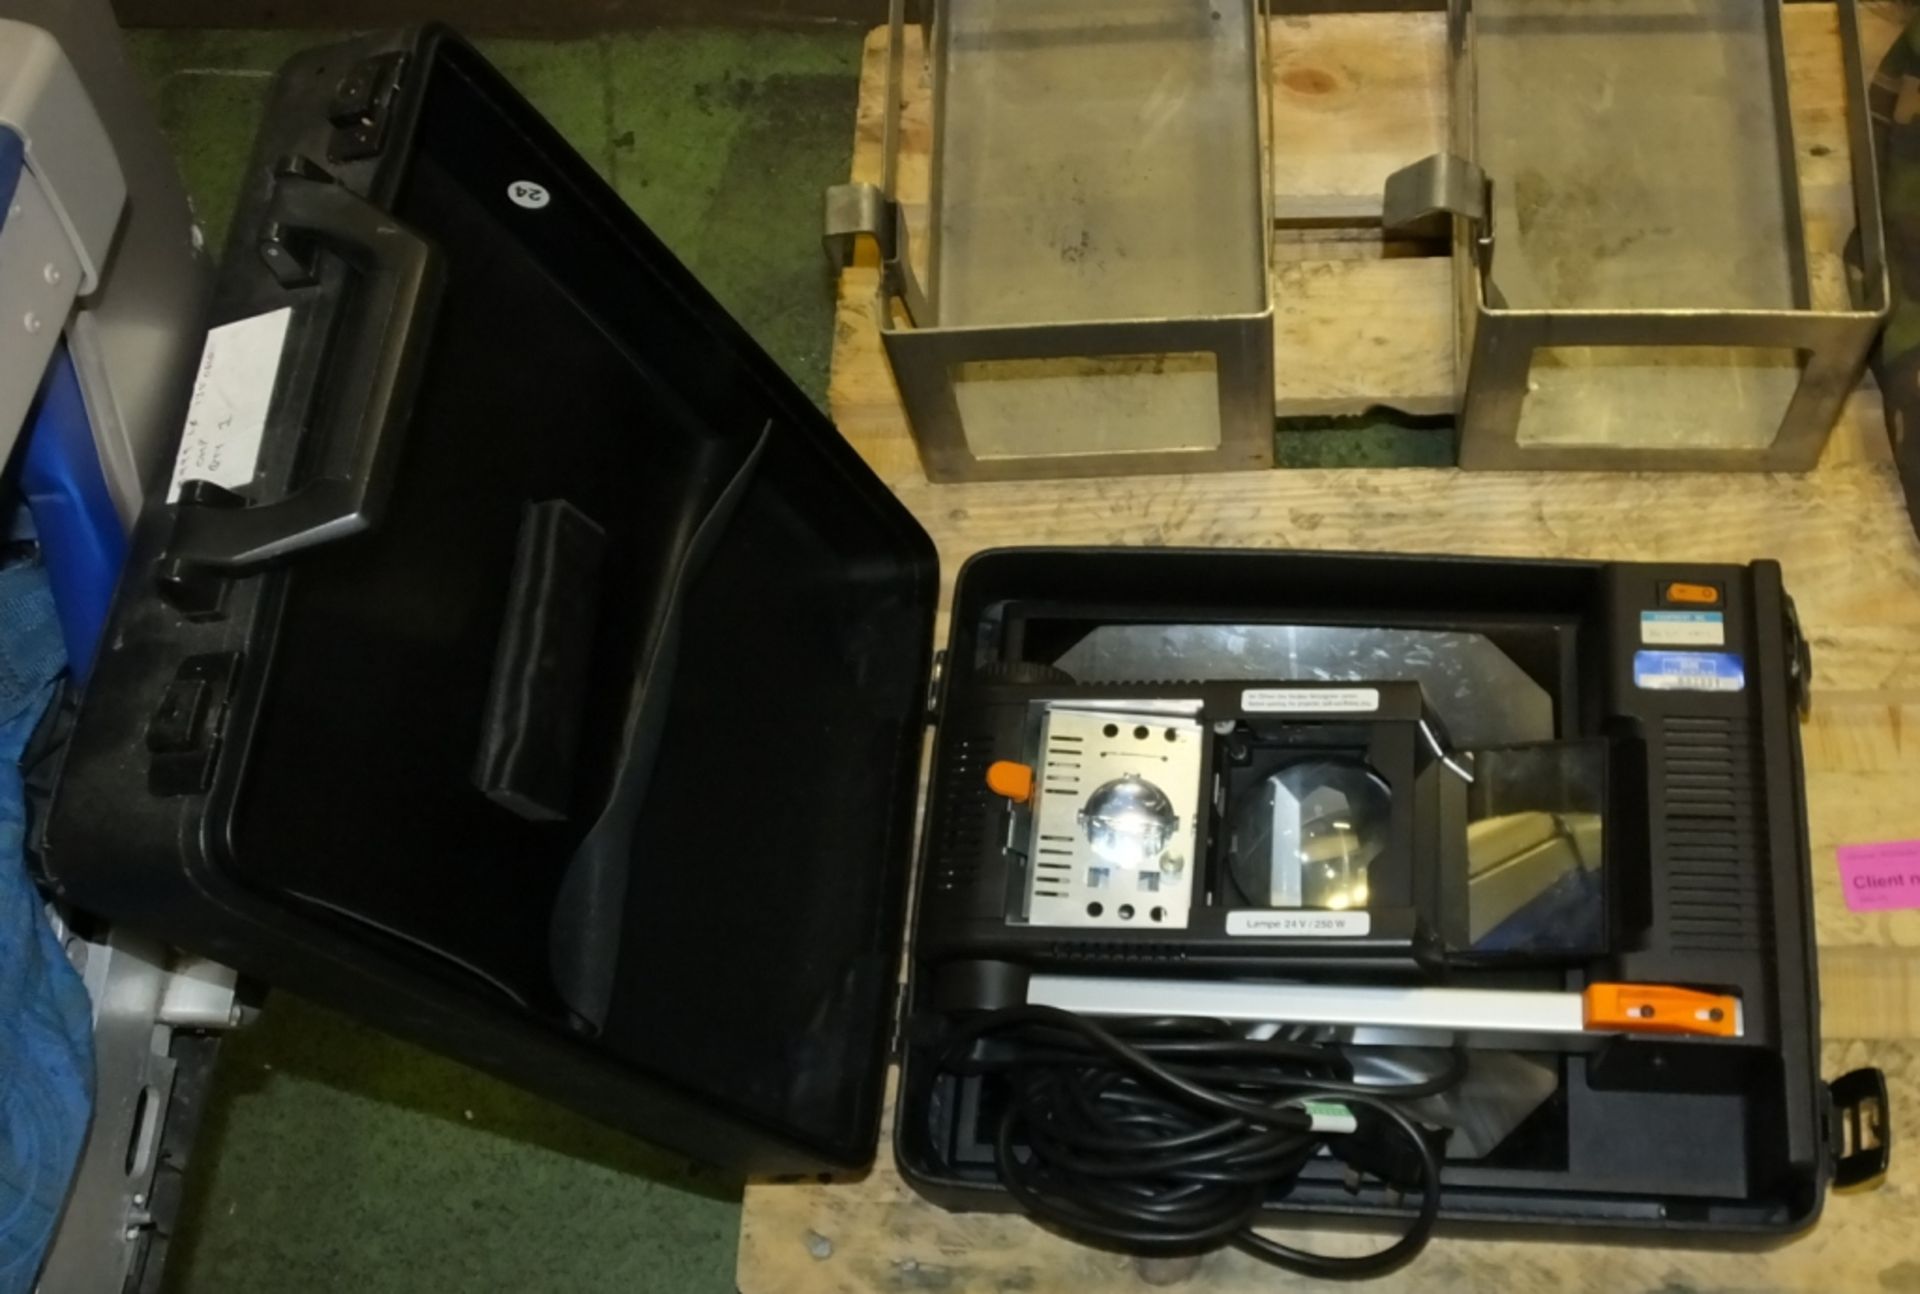 Overhead projector in carry case